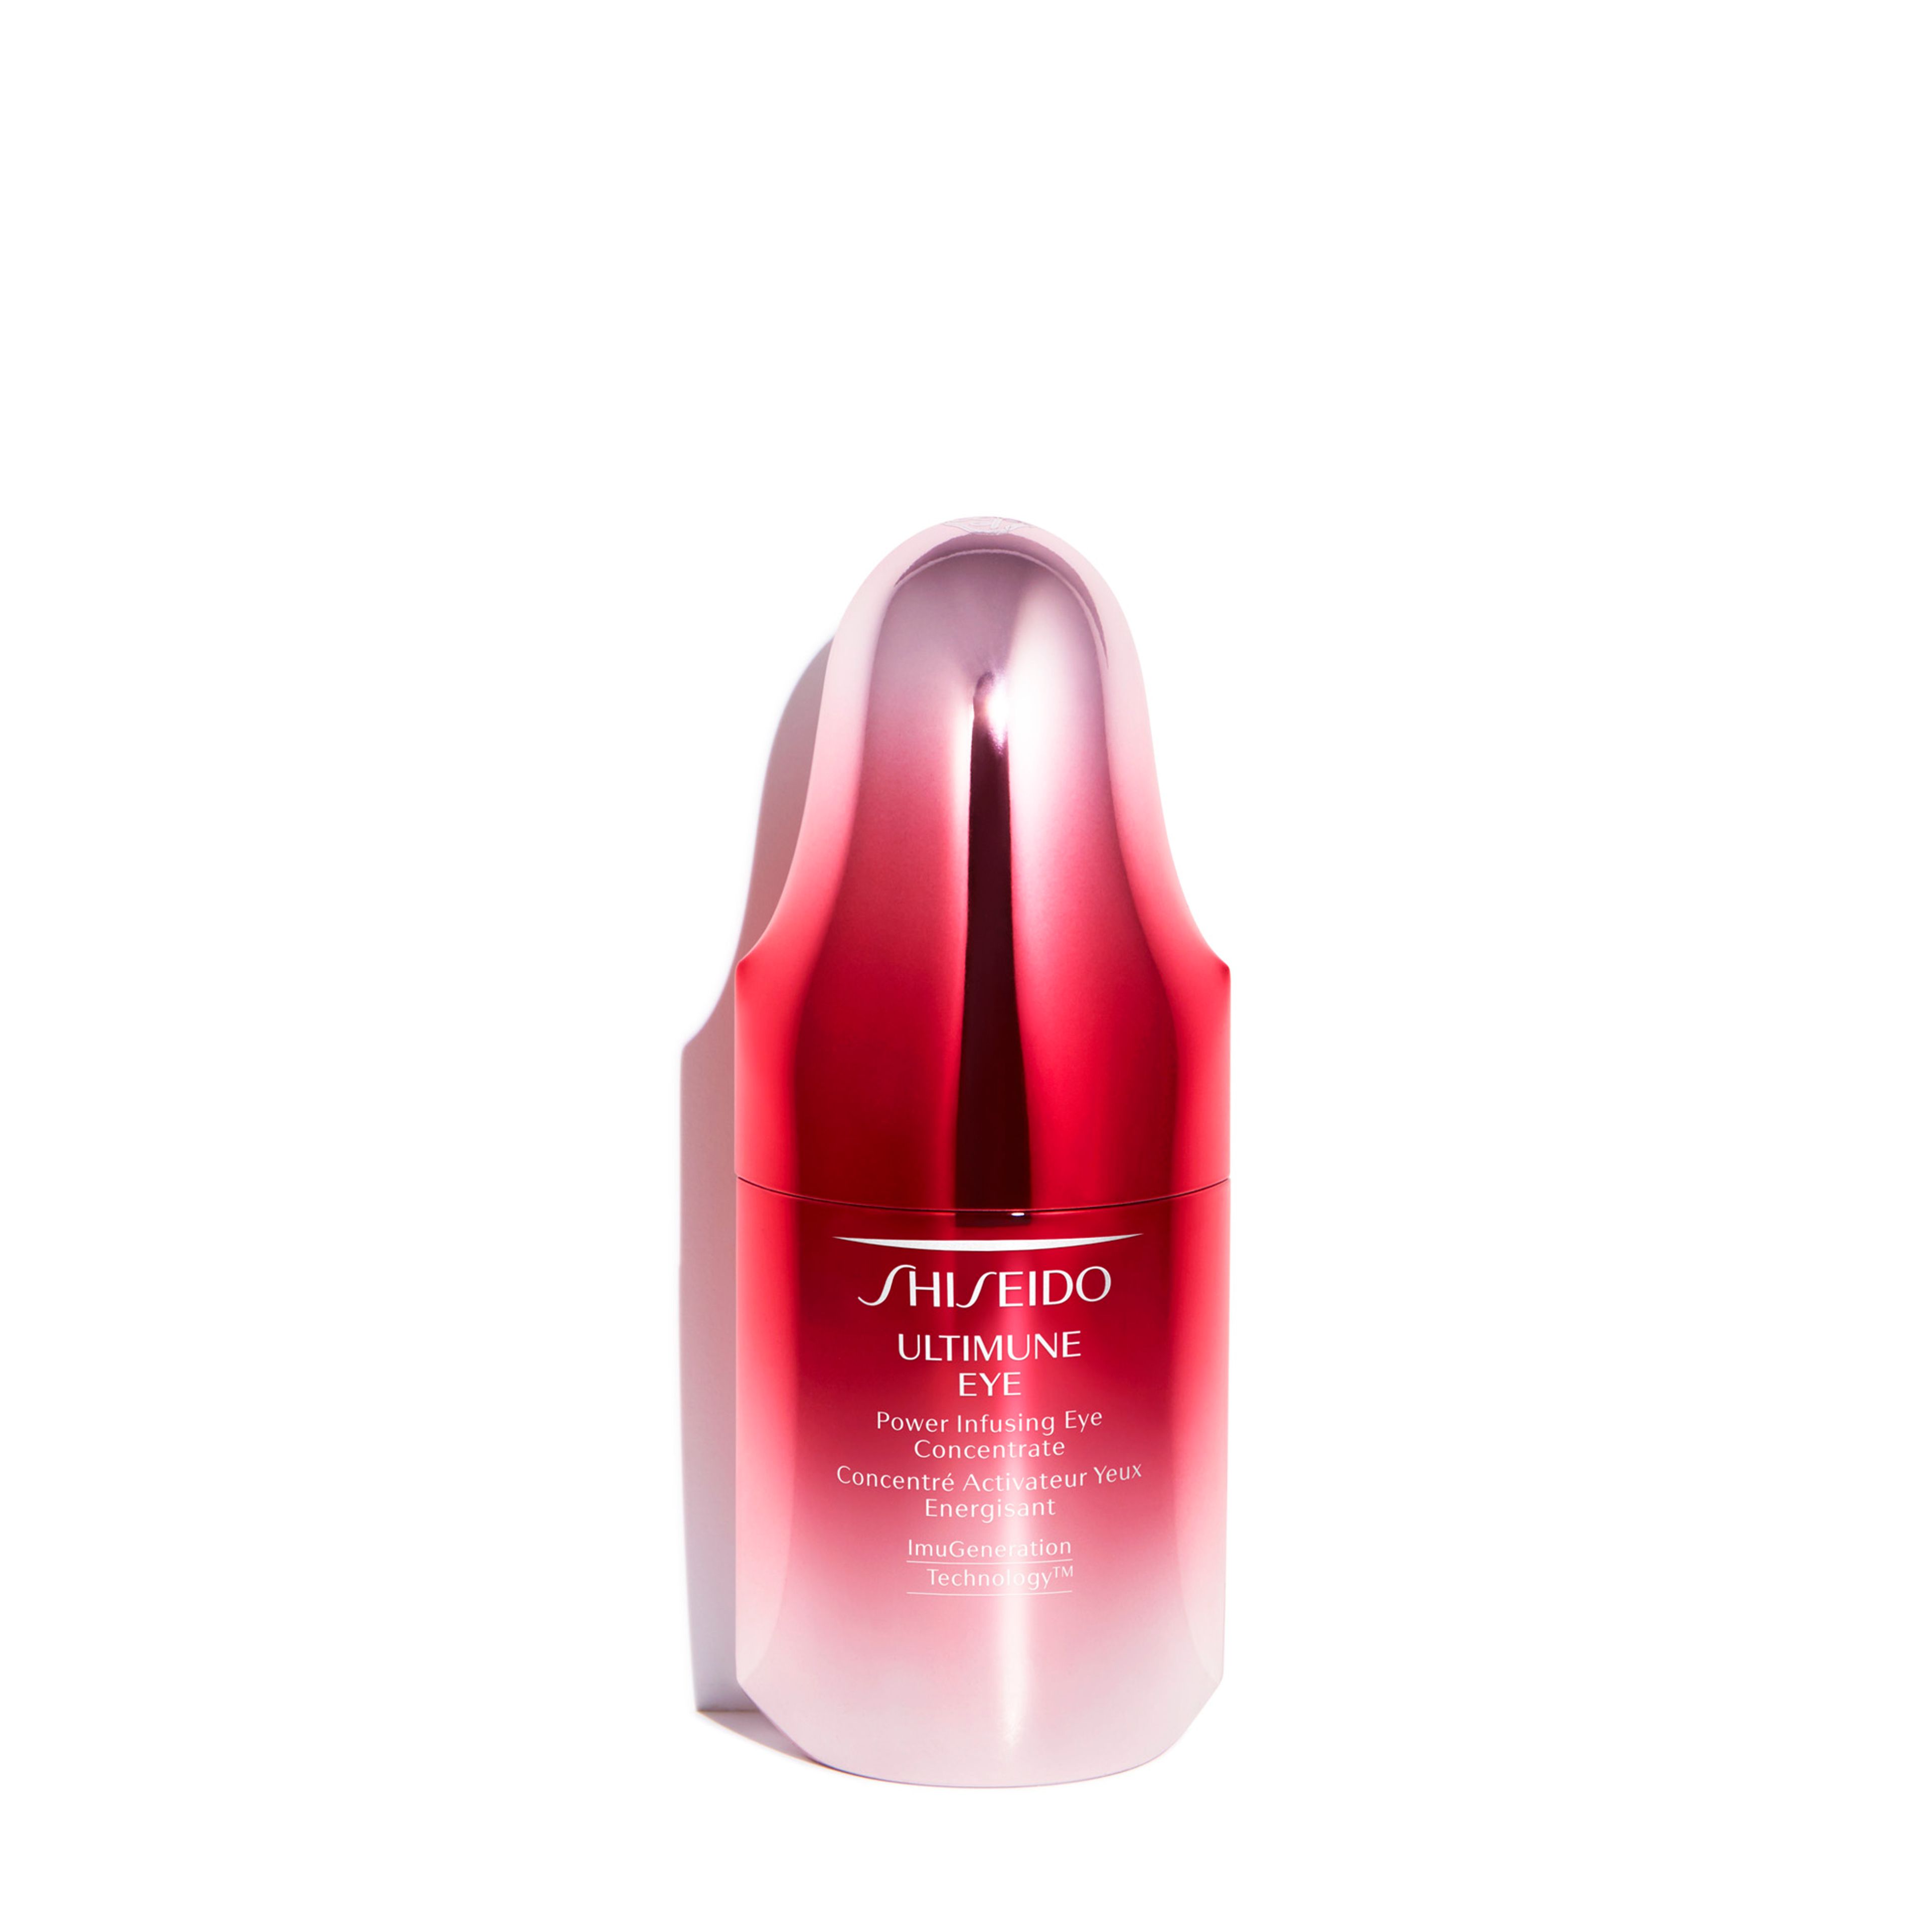 Shiseido Ultimune Eye Power Infusing Concentrate 1